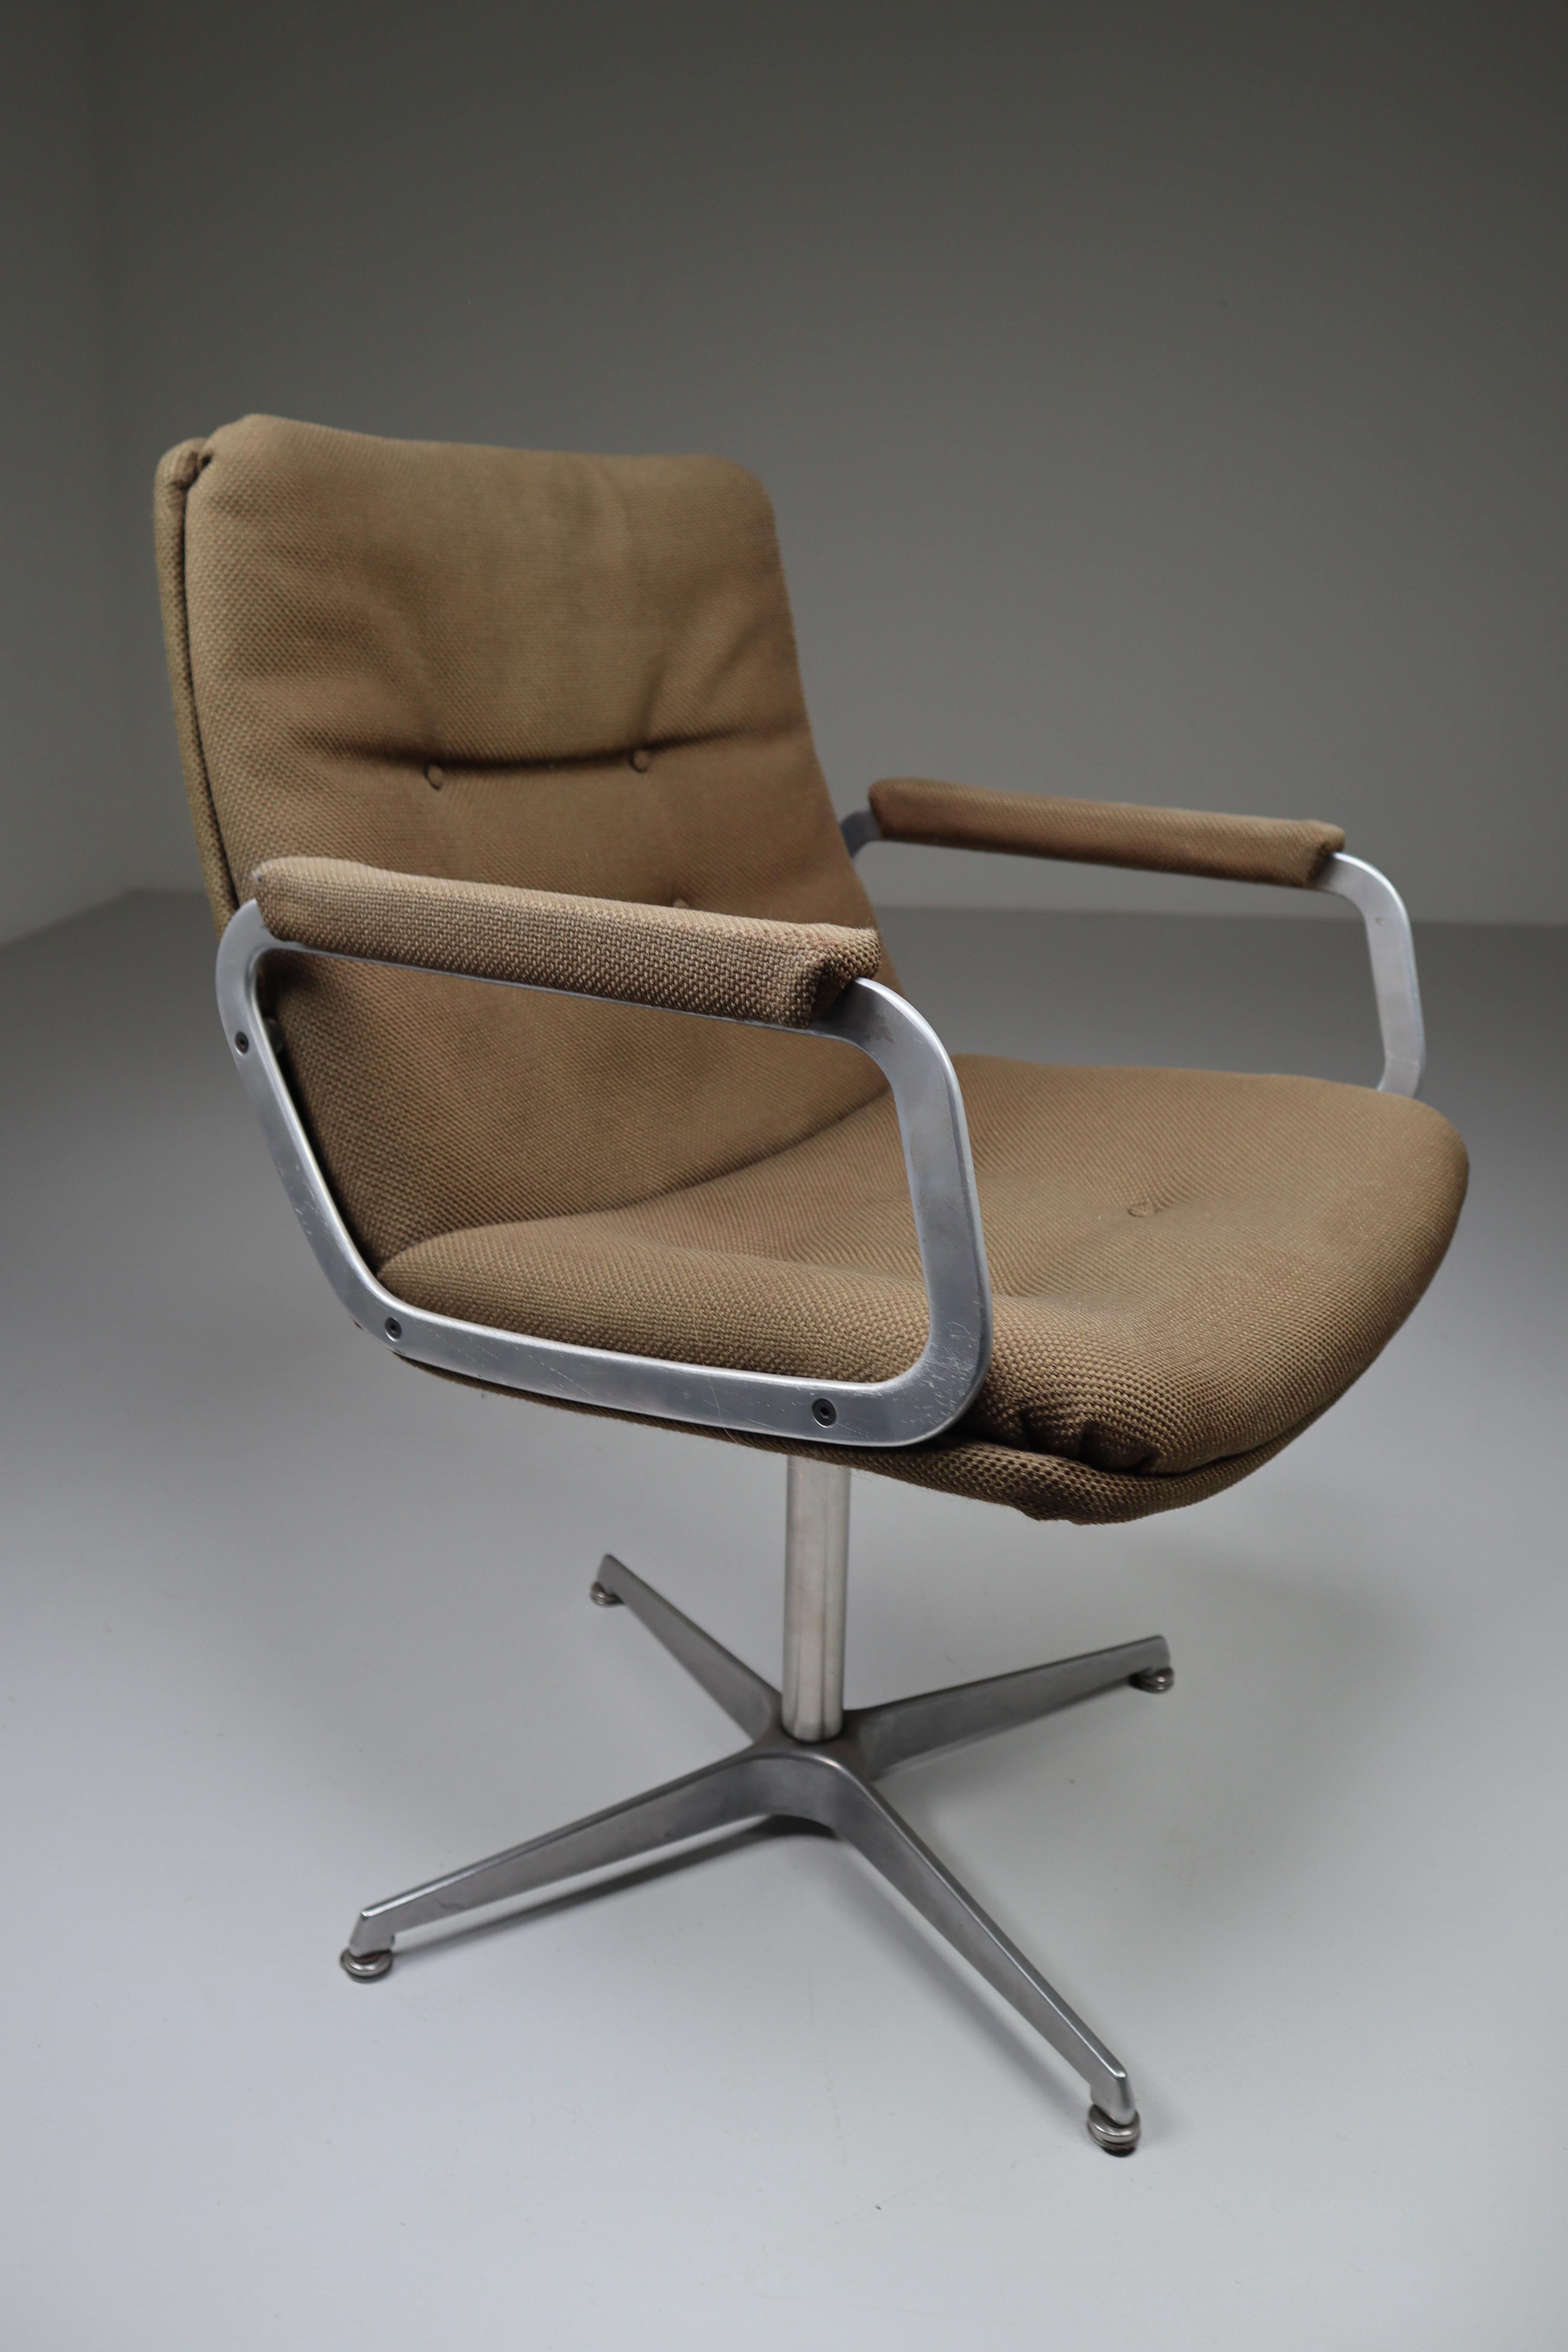 This vintage easy chair was designed by Geoffrey Harcourt for Artifort in the Netherlands during the 1960s. In good original vintage condition, 1965
Painter and industrial designer, Geoffrey D. Harcourt was born in 1935 in London, England. As a